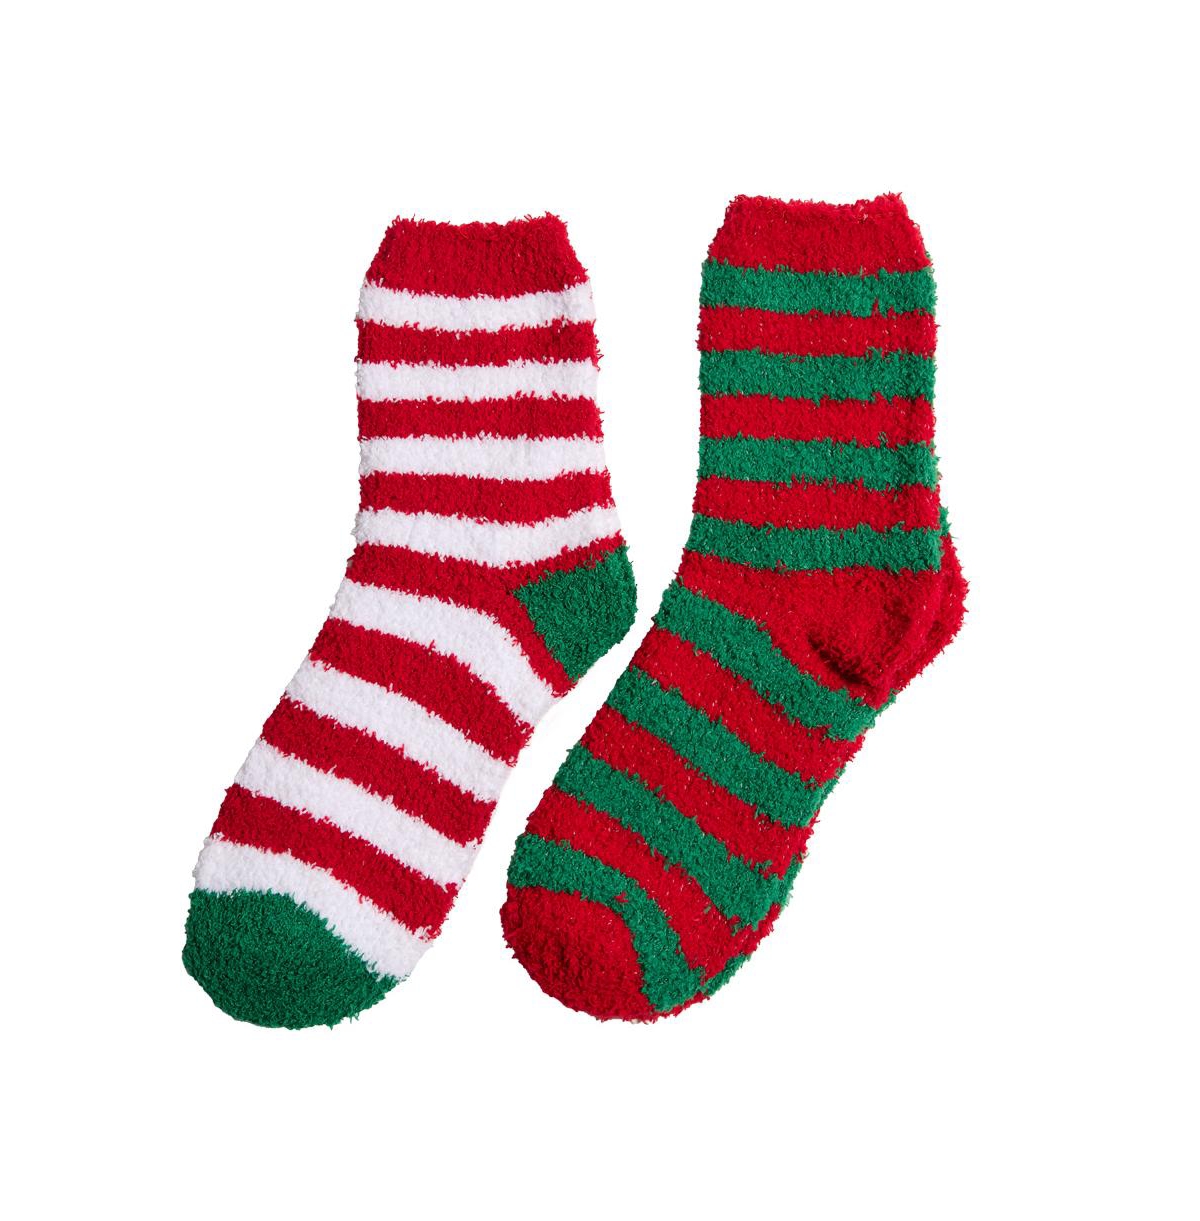 Cozy Striped Socks Two Pack - Open Miscellaneous